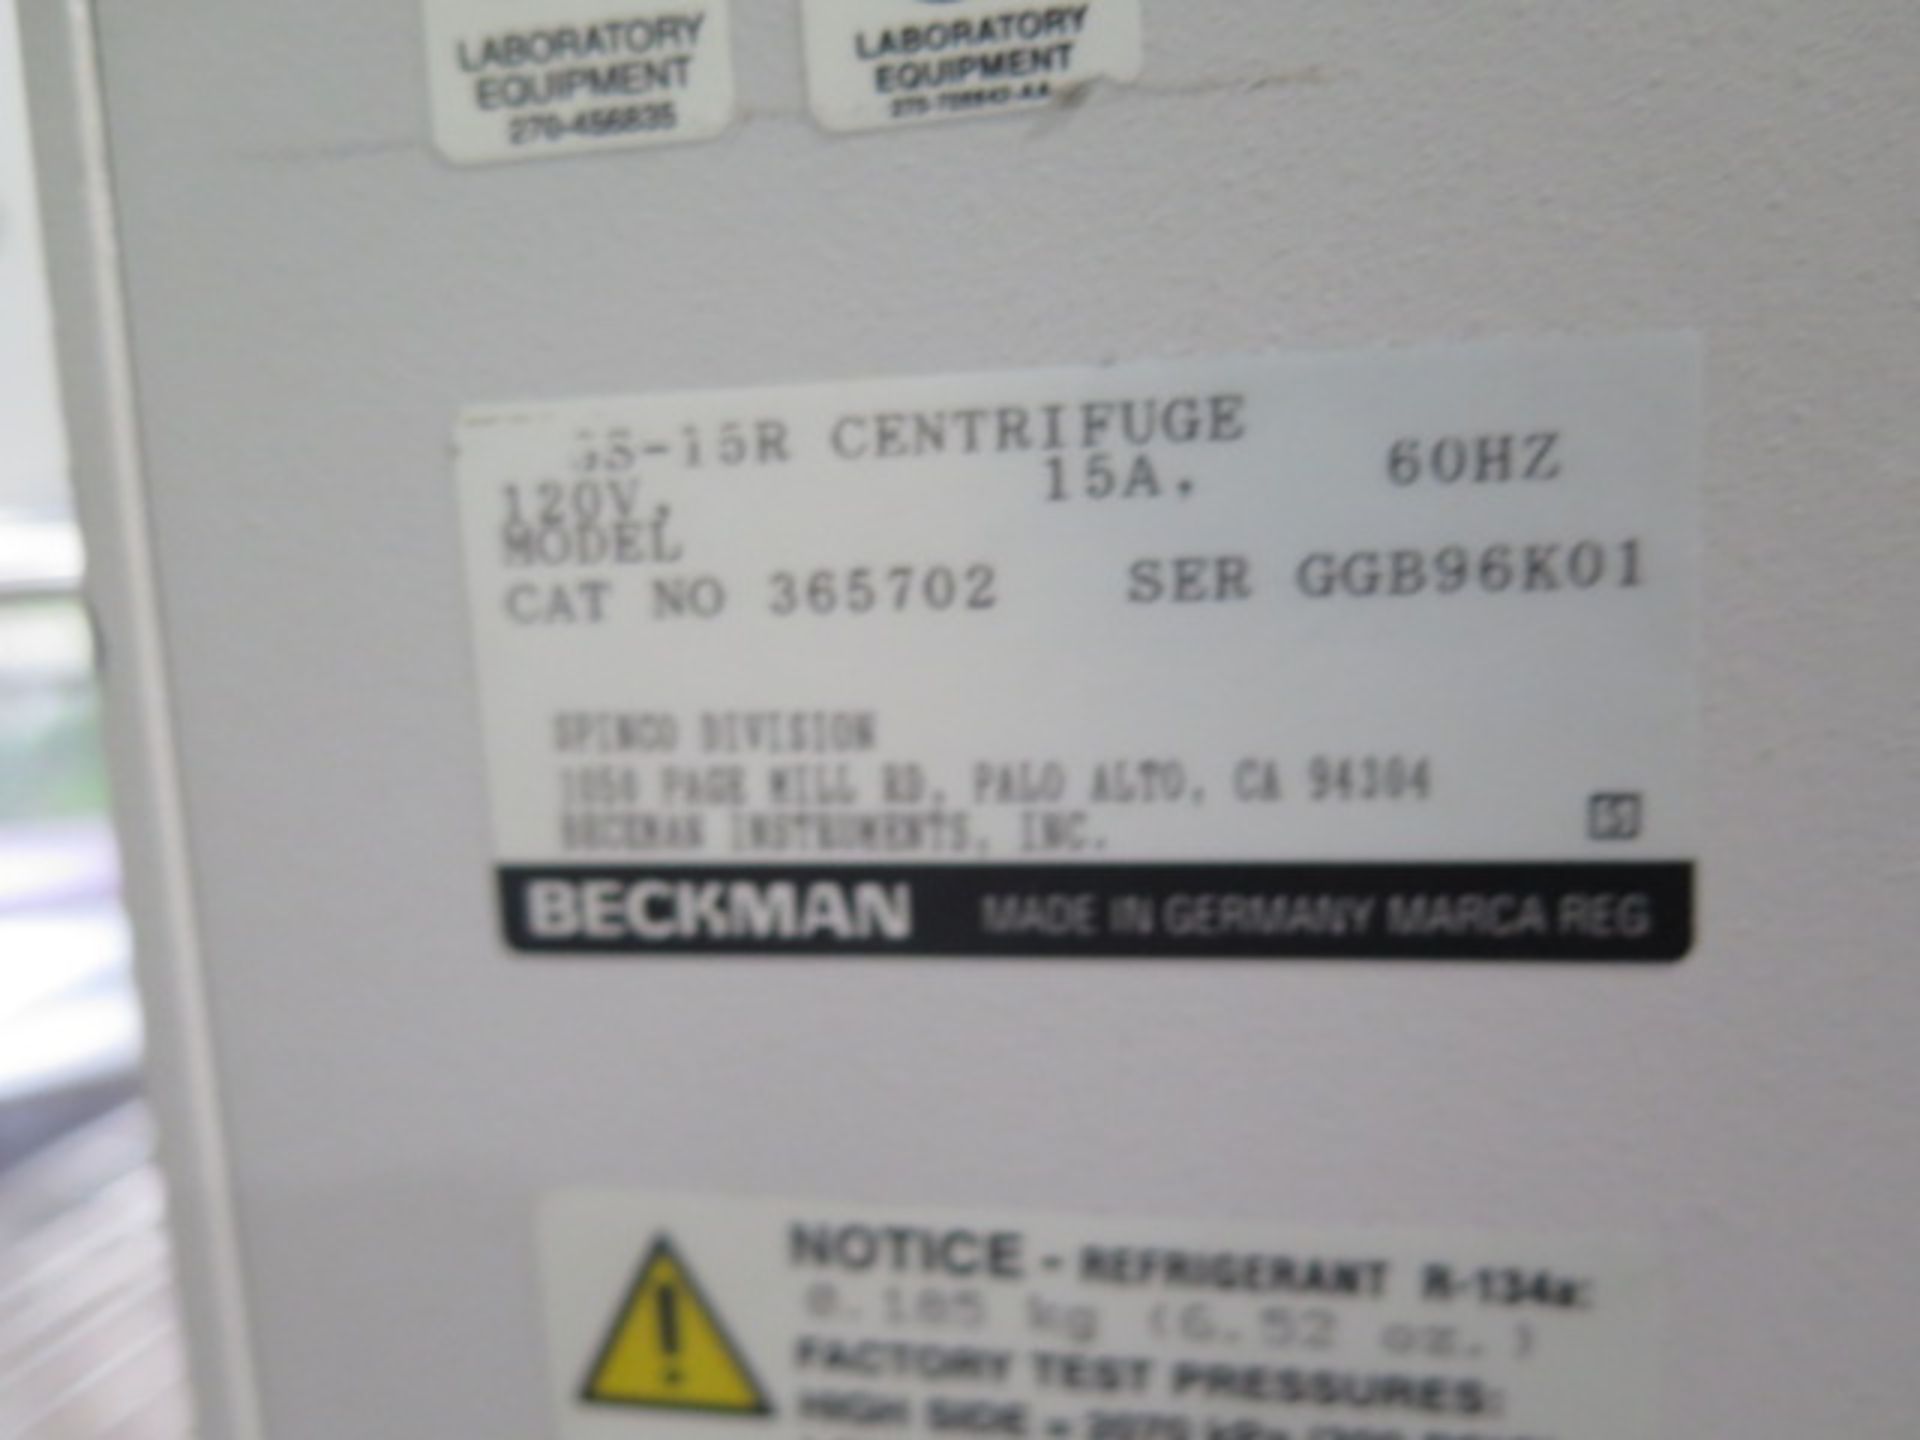 Beckman GS-15R Refrigerated Centrifuge s/n GGB96K01 (SOLD AS-IS - NO WARRANTY) - Image 9 of 9